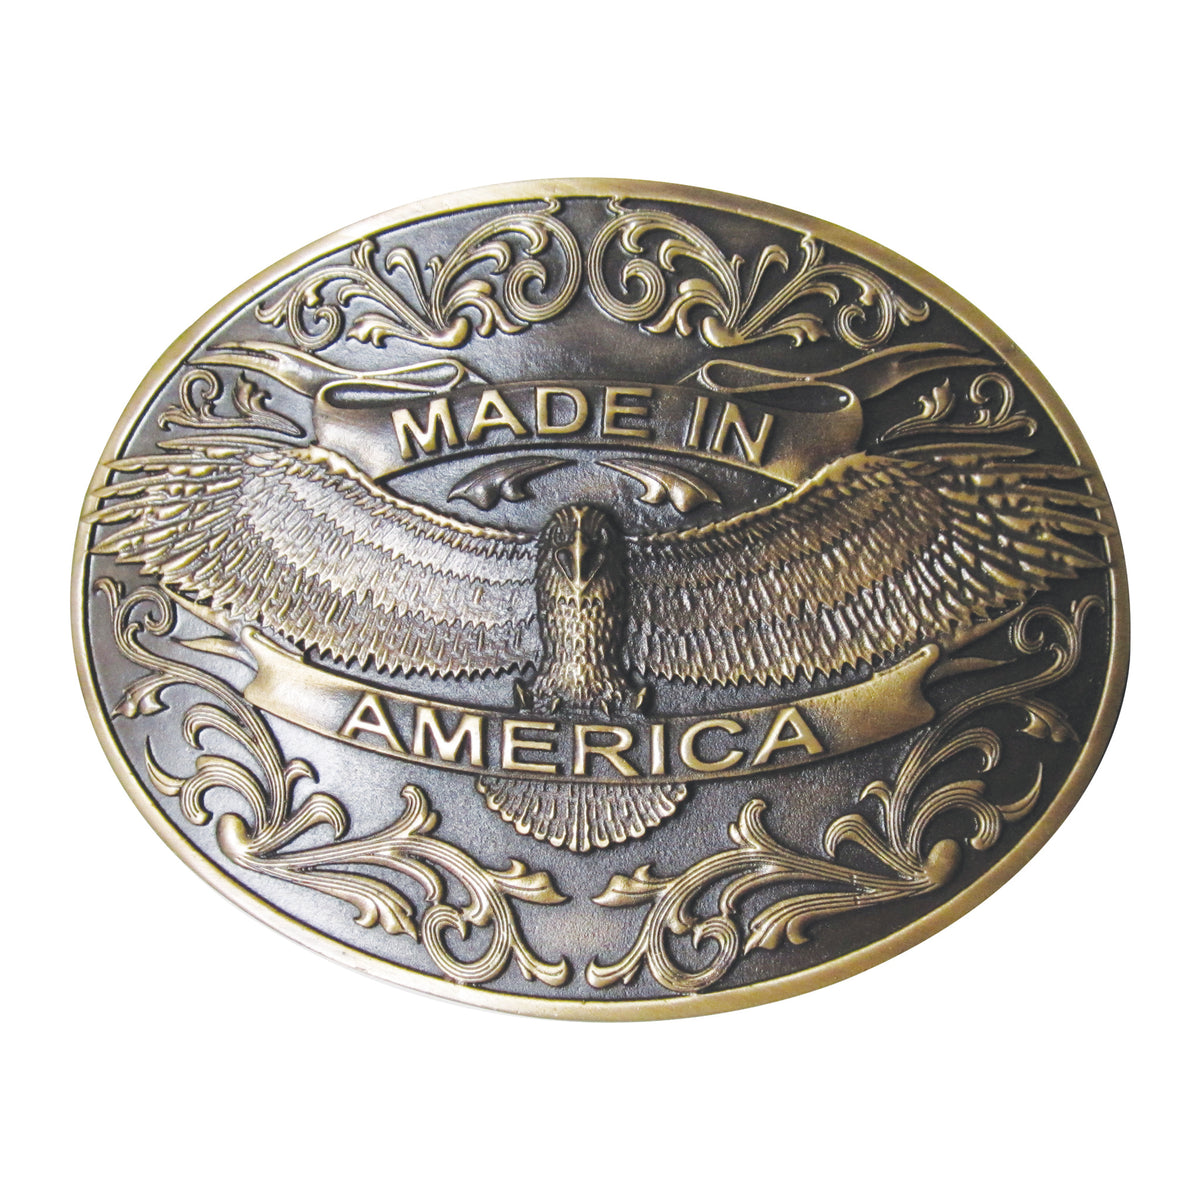 Made in America Buckle